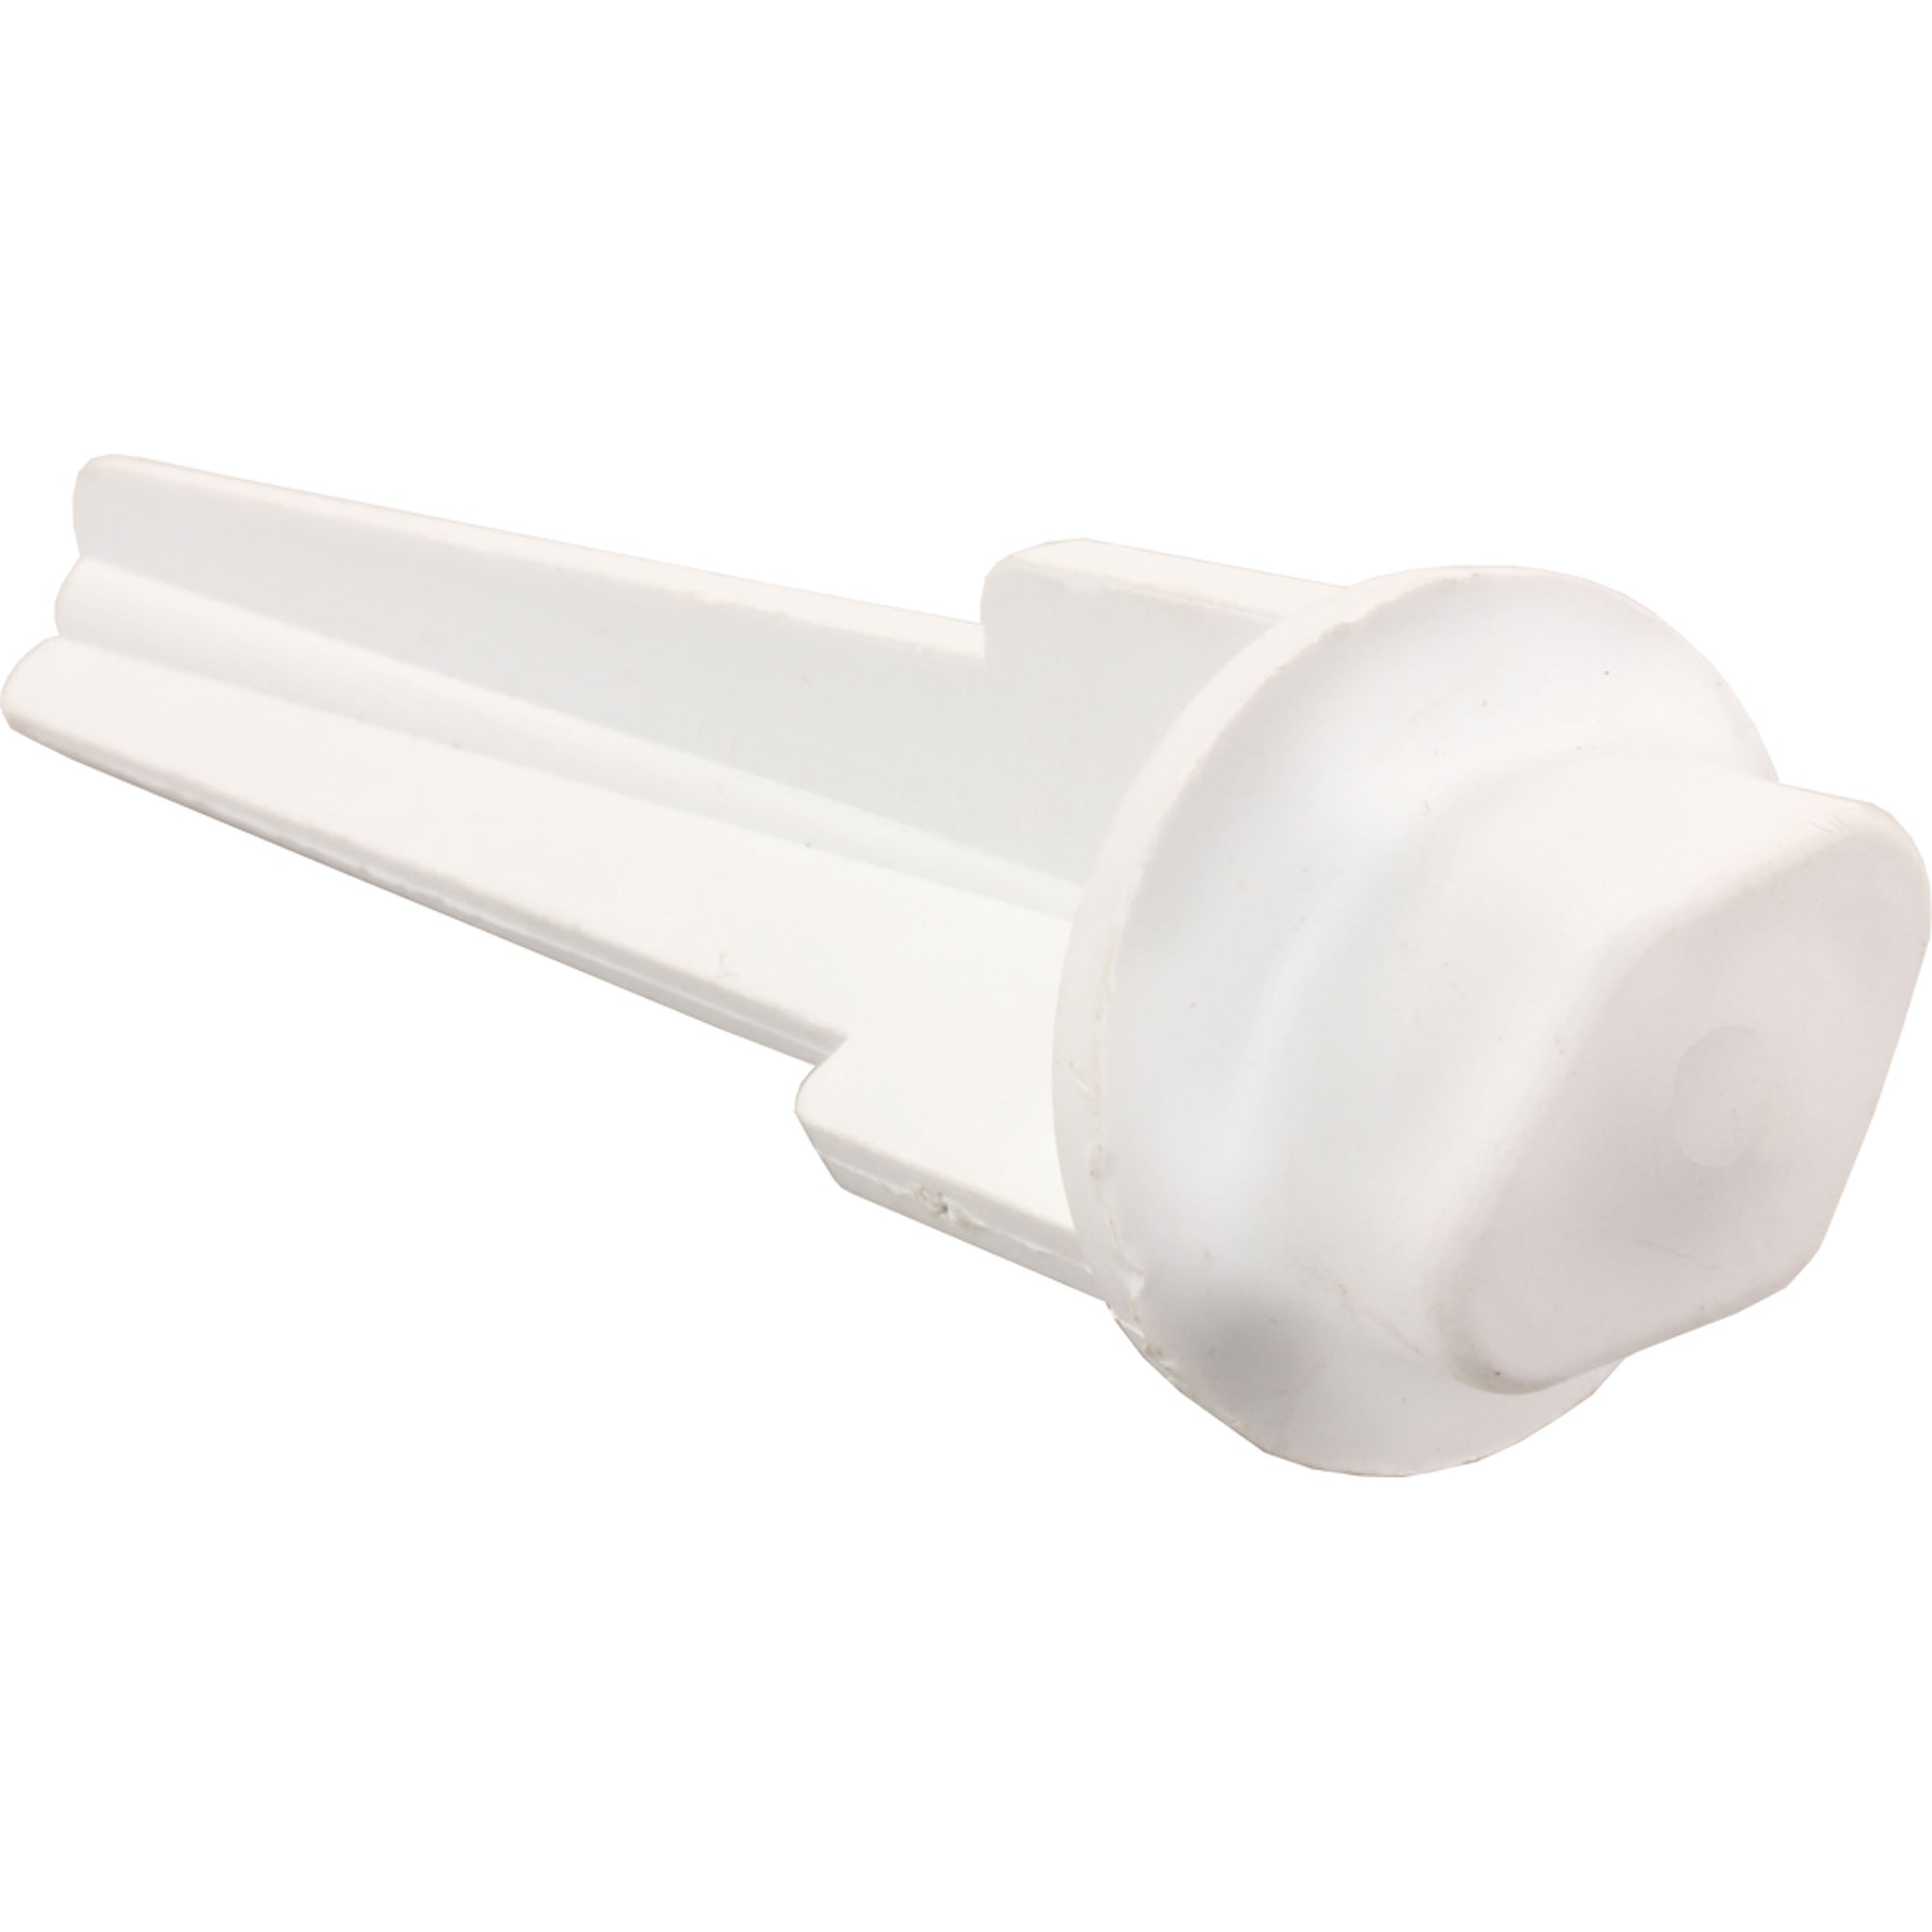 JR Products 95335 Lavatory Sink Stopper - White